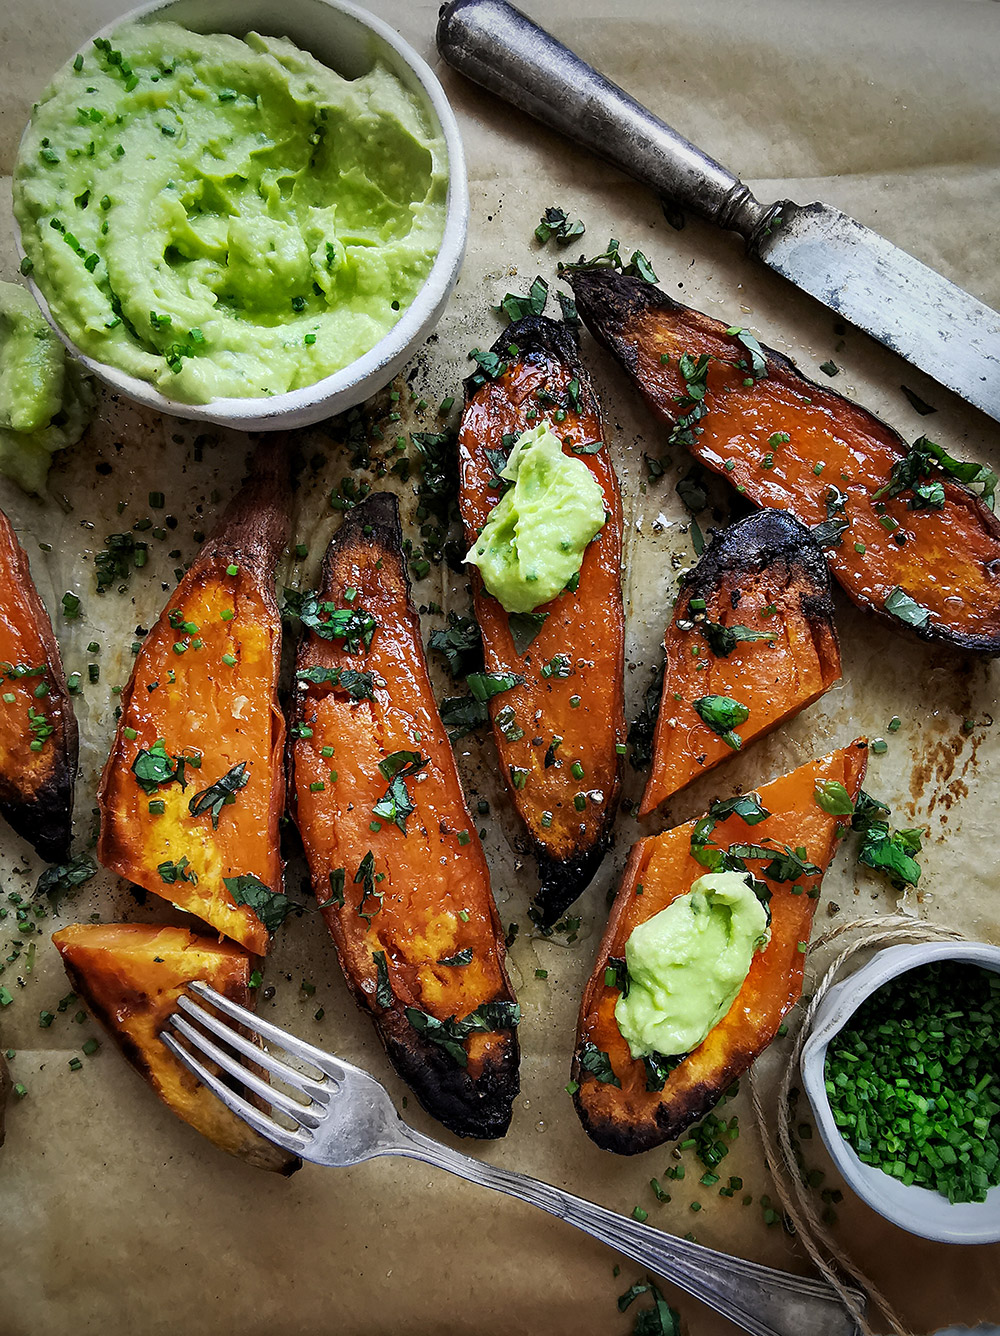 Roasted sweet potatoes with avocado lime dip